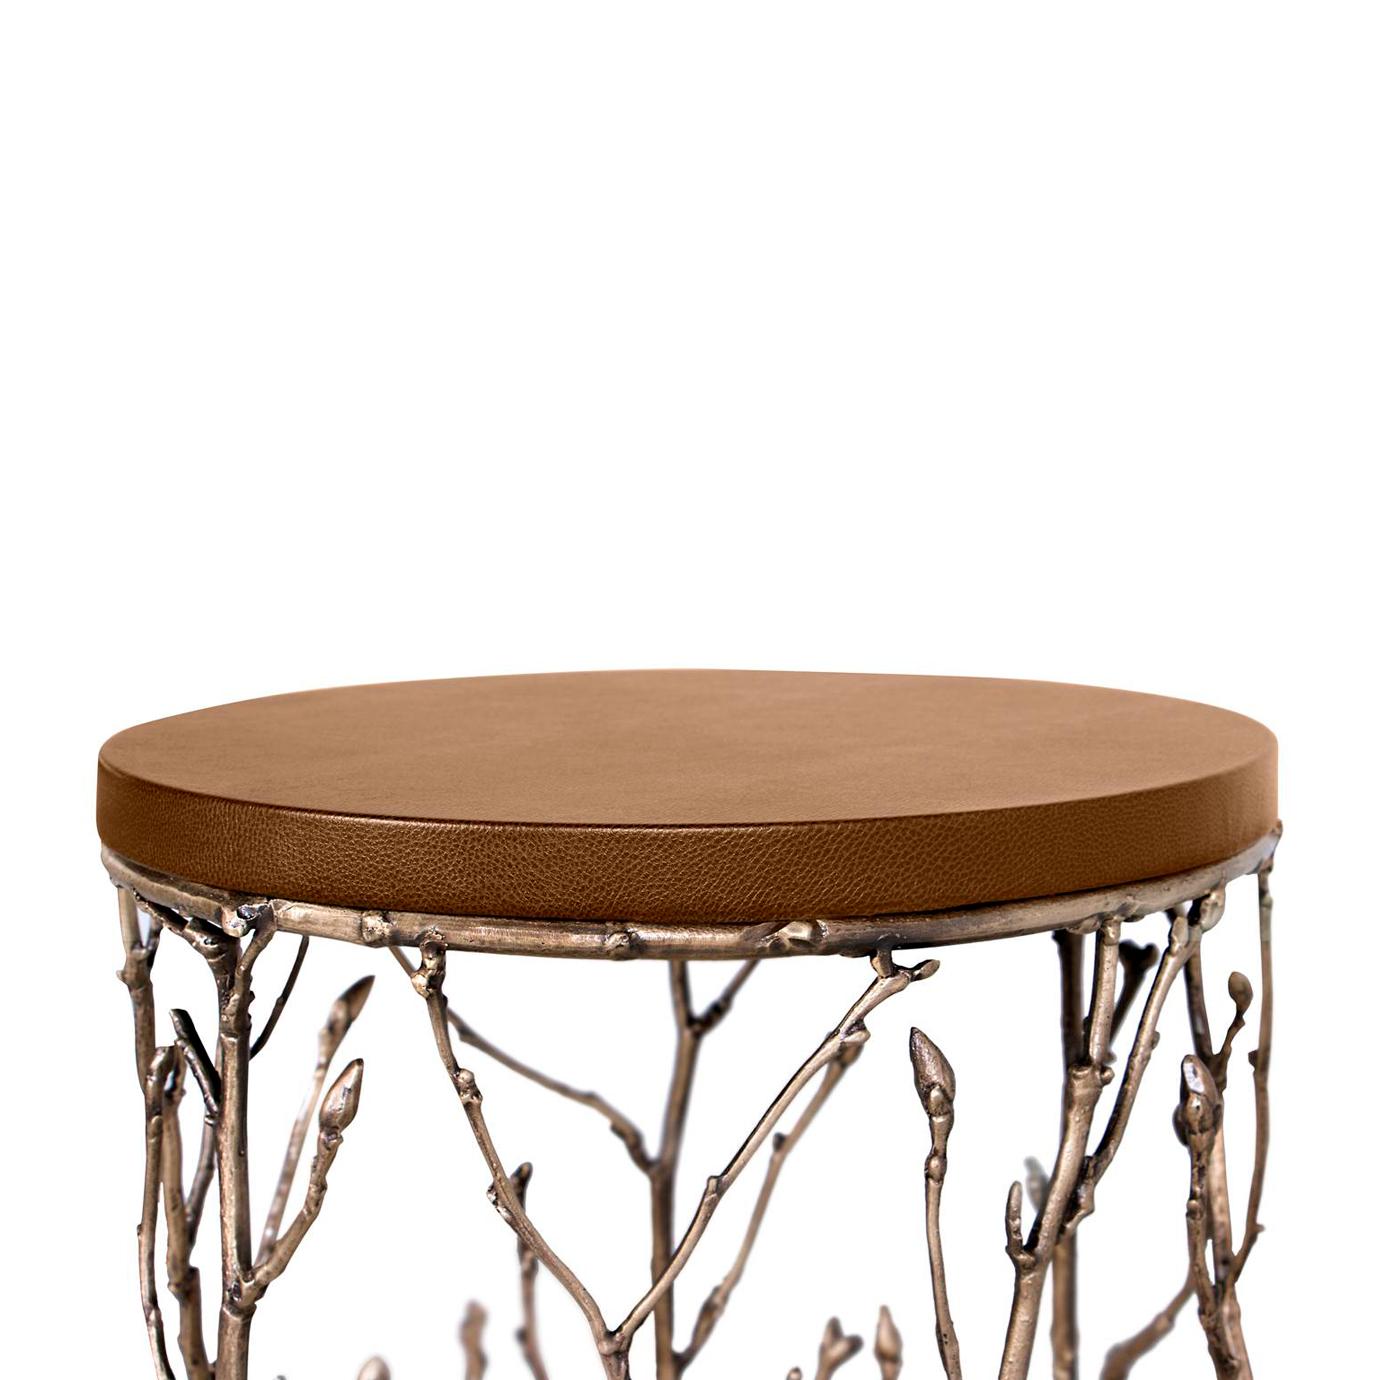 Our artisans have masterfully captured the alluring essence of an enchanted forest with this side table. The antique gilded branch like structure can't help but mesmerize the beholder.